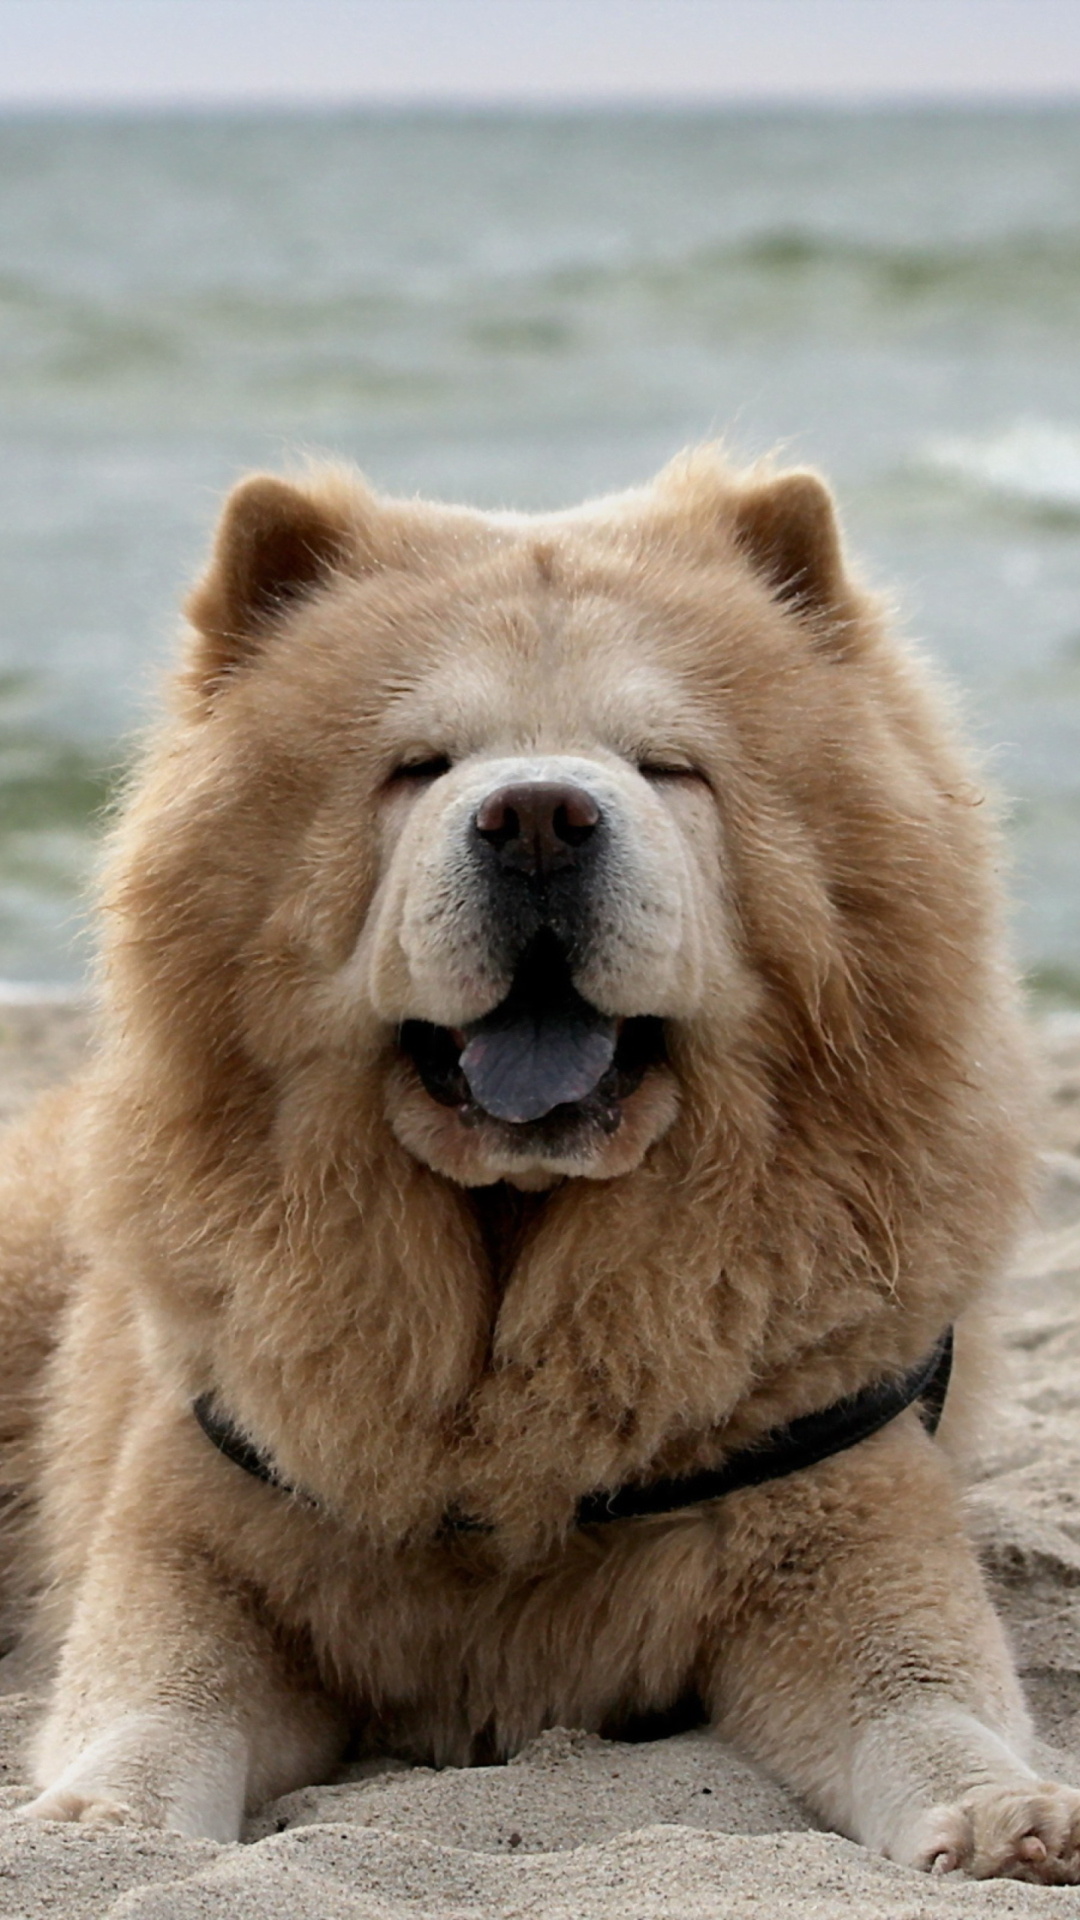 Chow Chow on beach, Wallpaper for screen, Relaxing scenery, 1080x1920 Full HD Handy